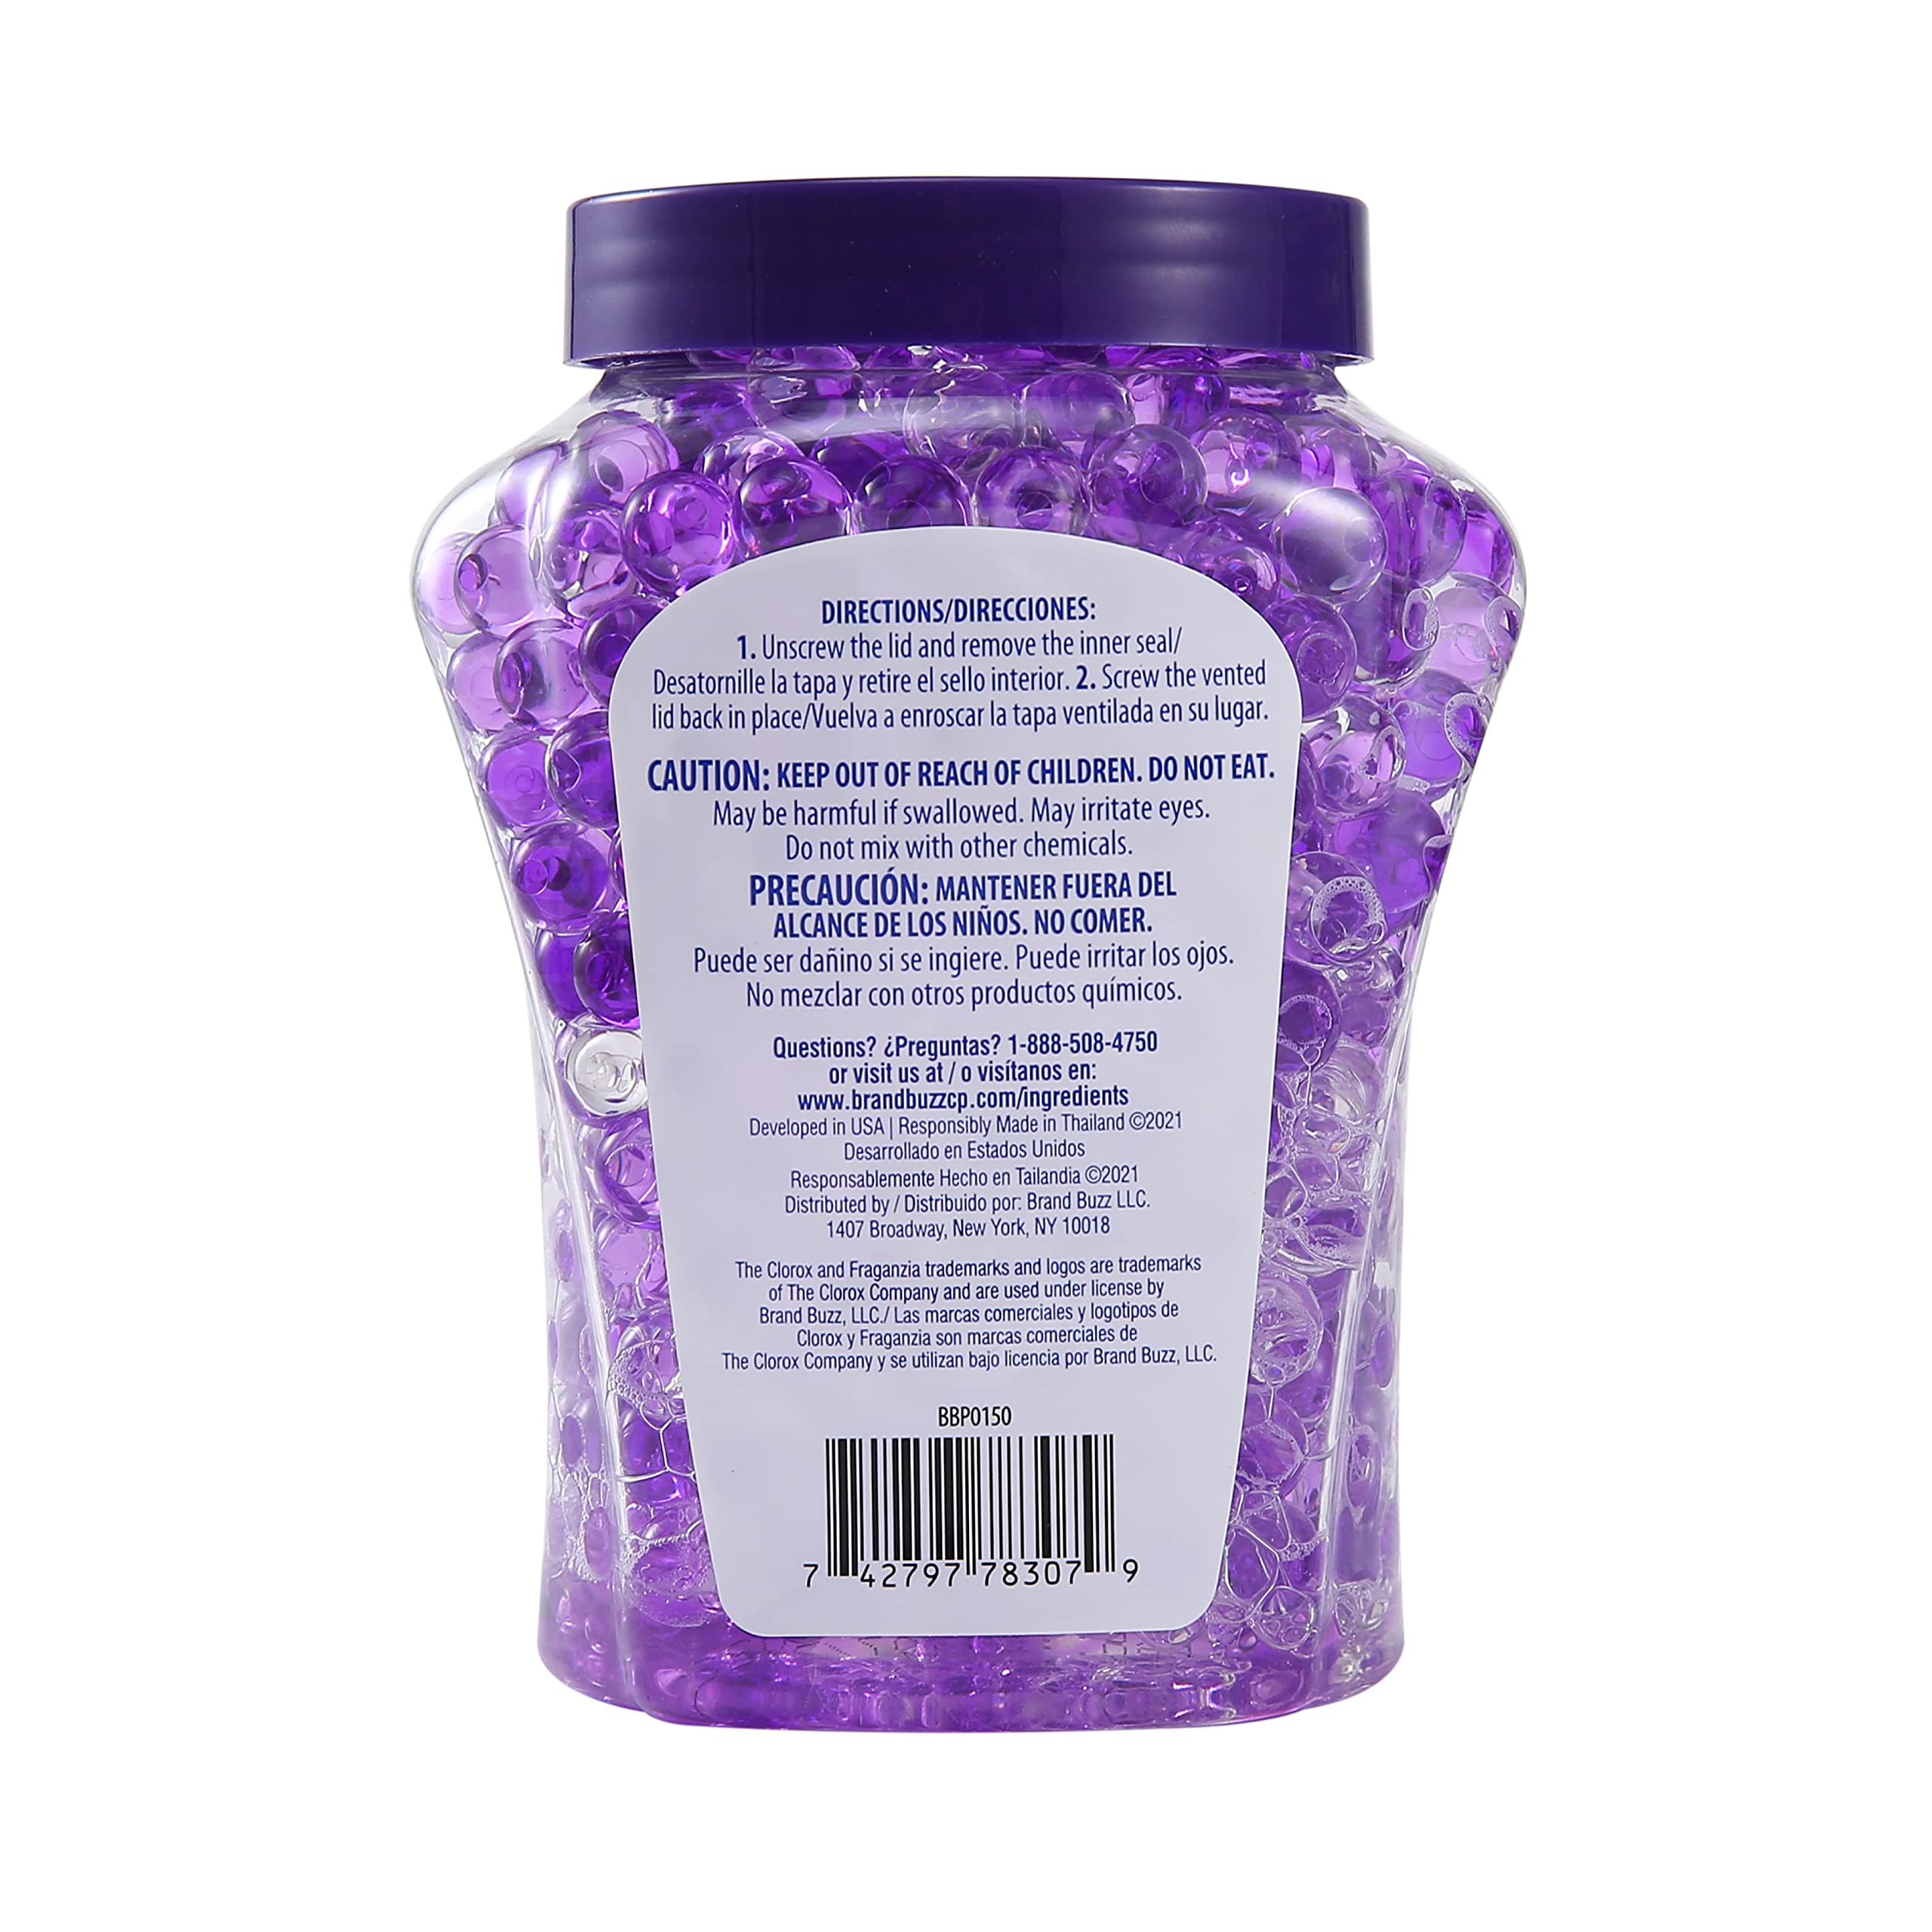 Clorox Fraganzia Air Care Air Freshener Crystal Beads in Lavender with Eucalpytus Scent Scent, 12 Ounces | Lavender Eucalyptus Scented Air Freshener Gel Beads from Clorox Fraganzia for Car or Home